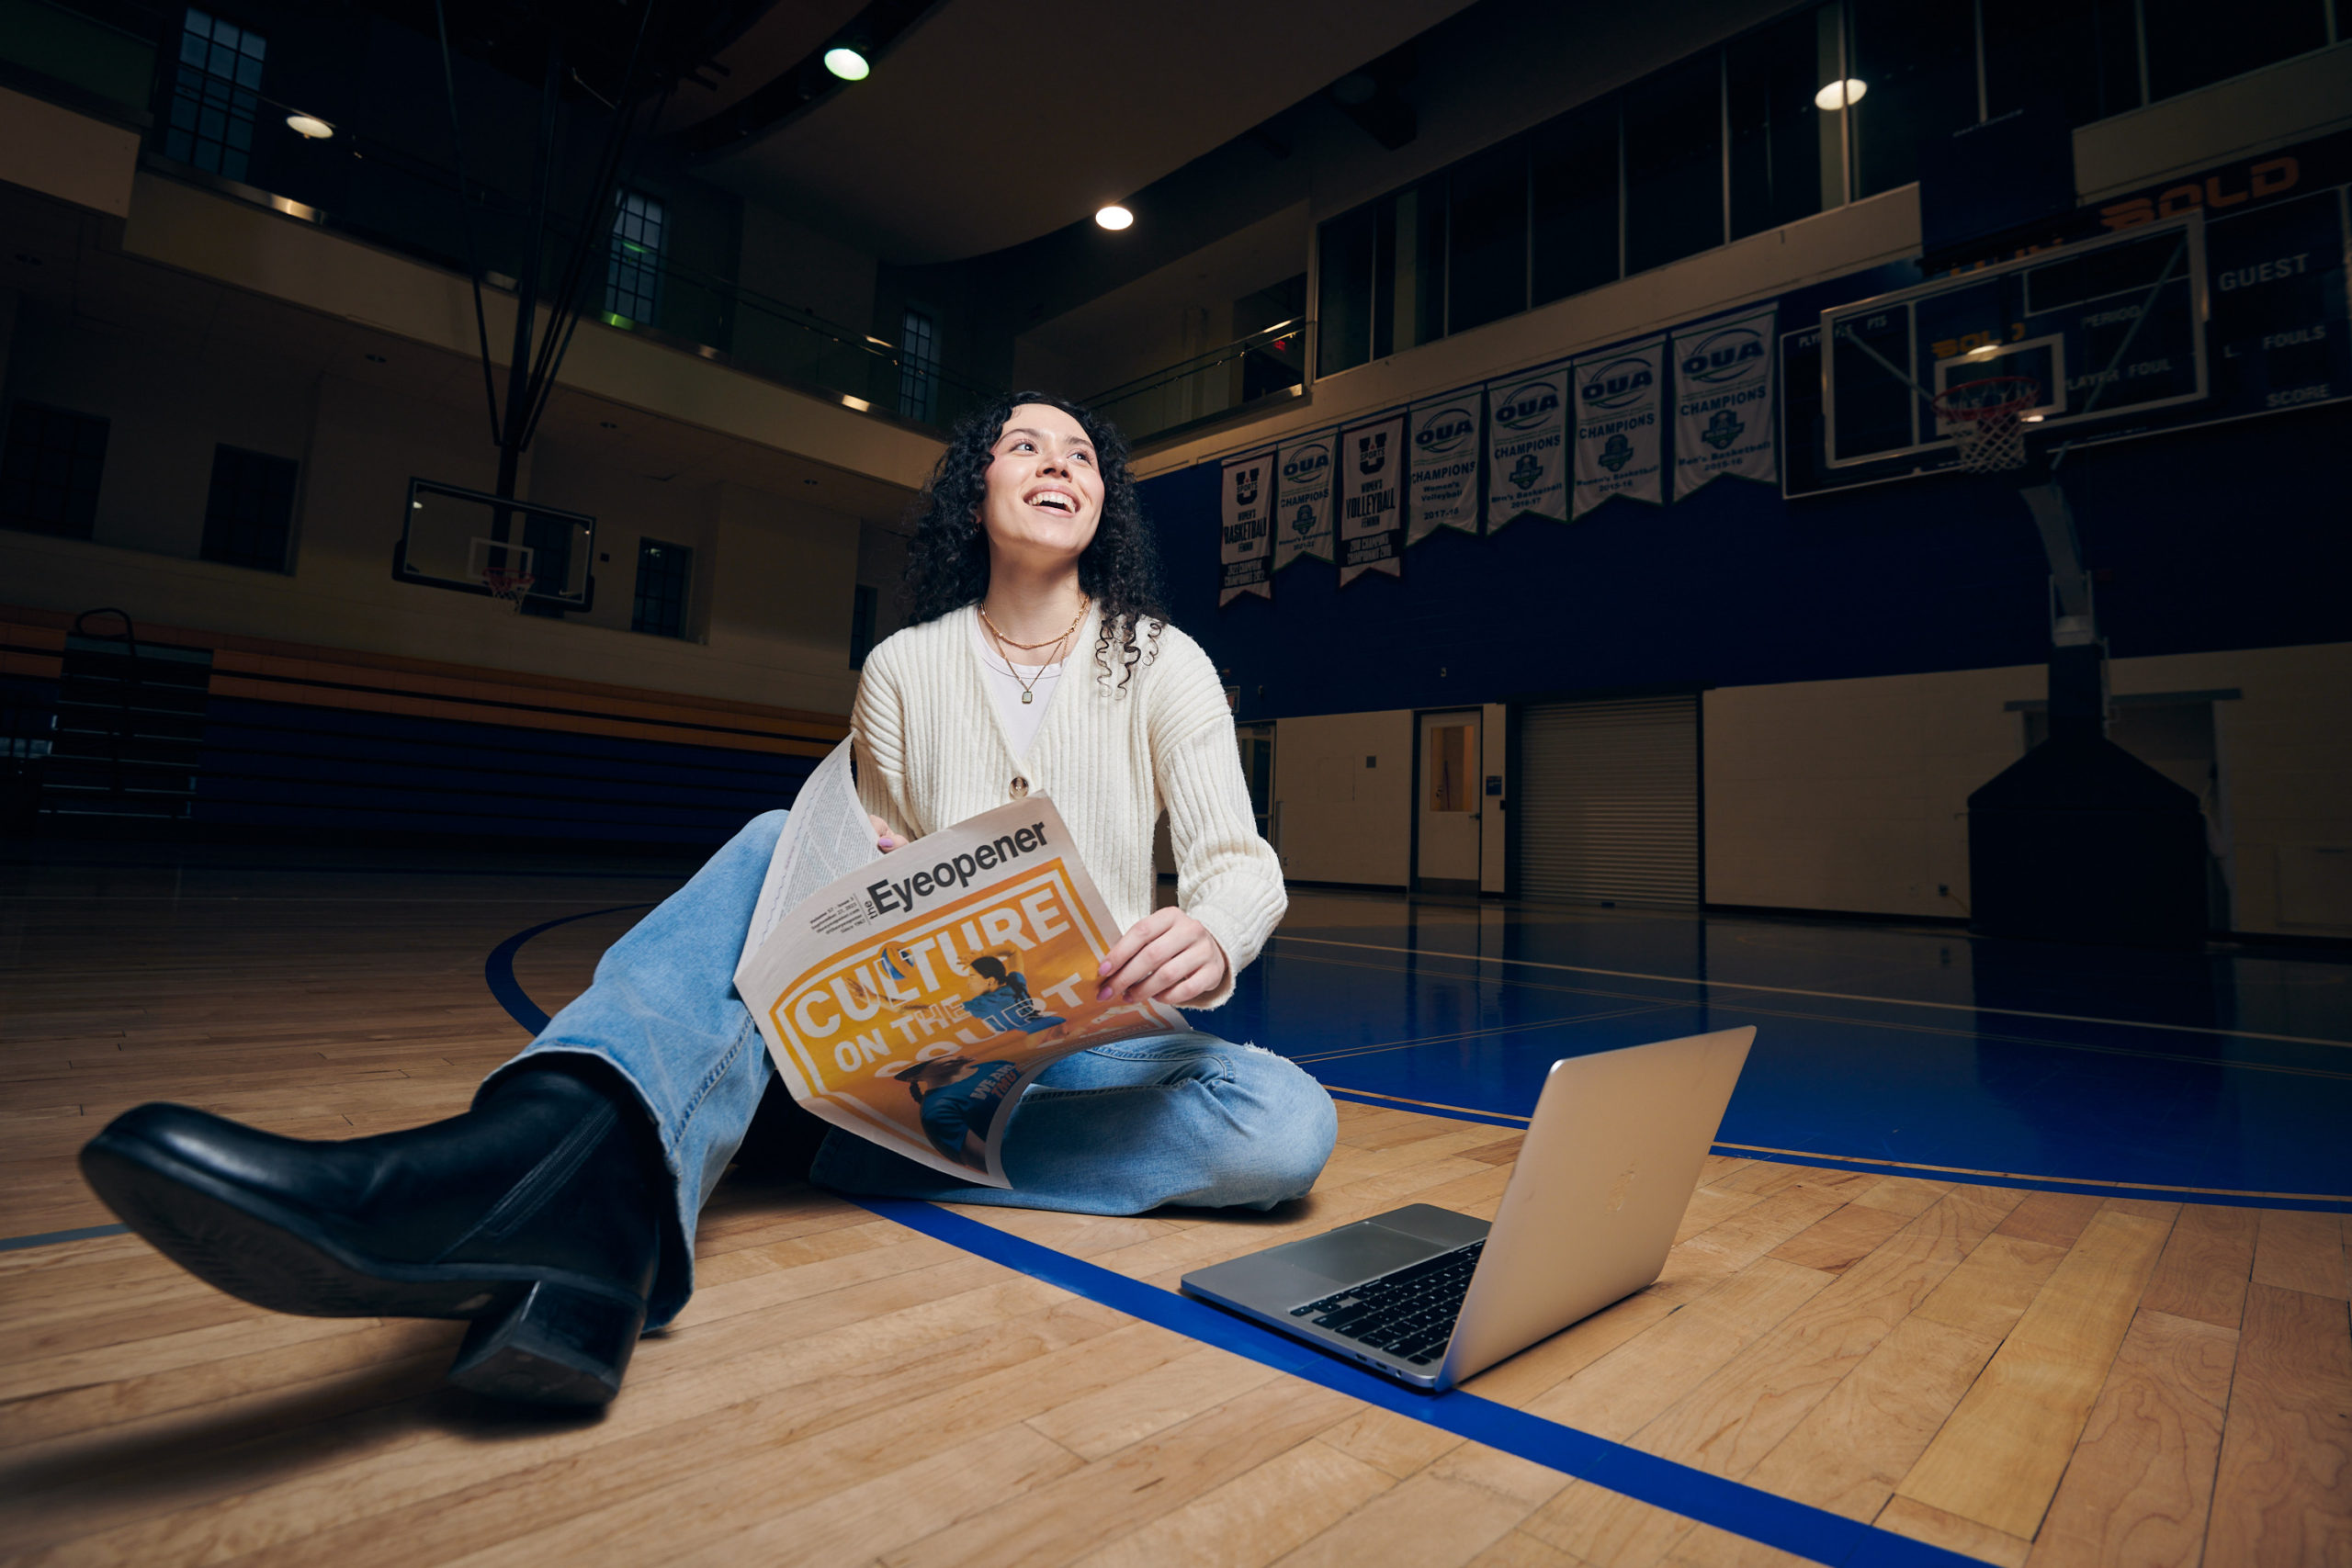 A woman sits on a basketball court holding a newspaper